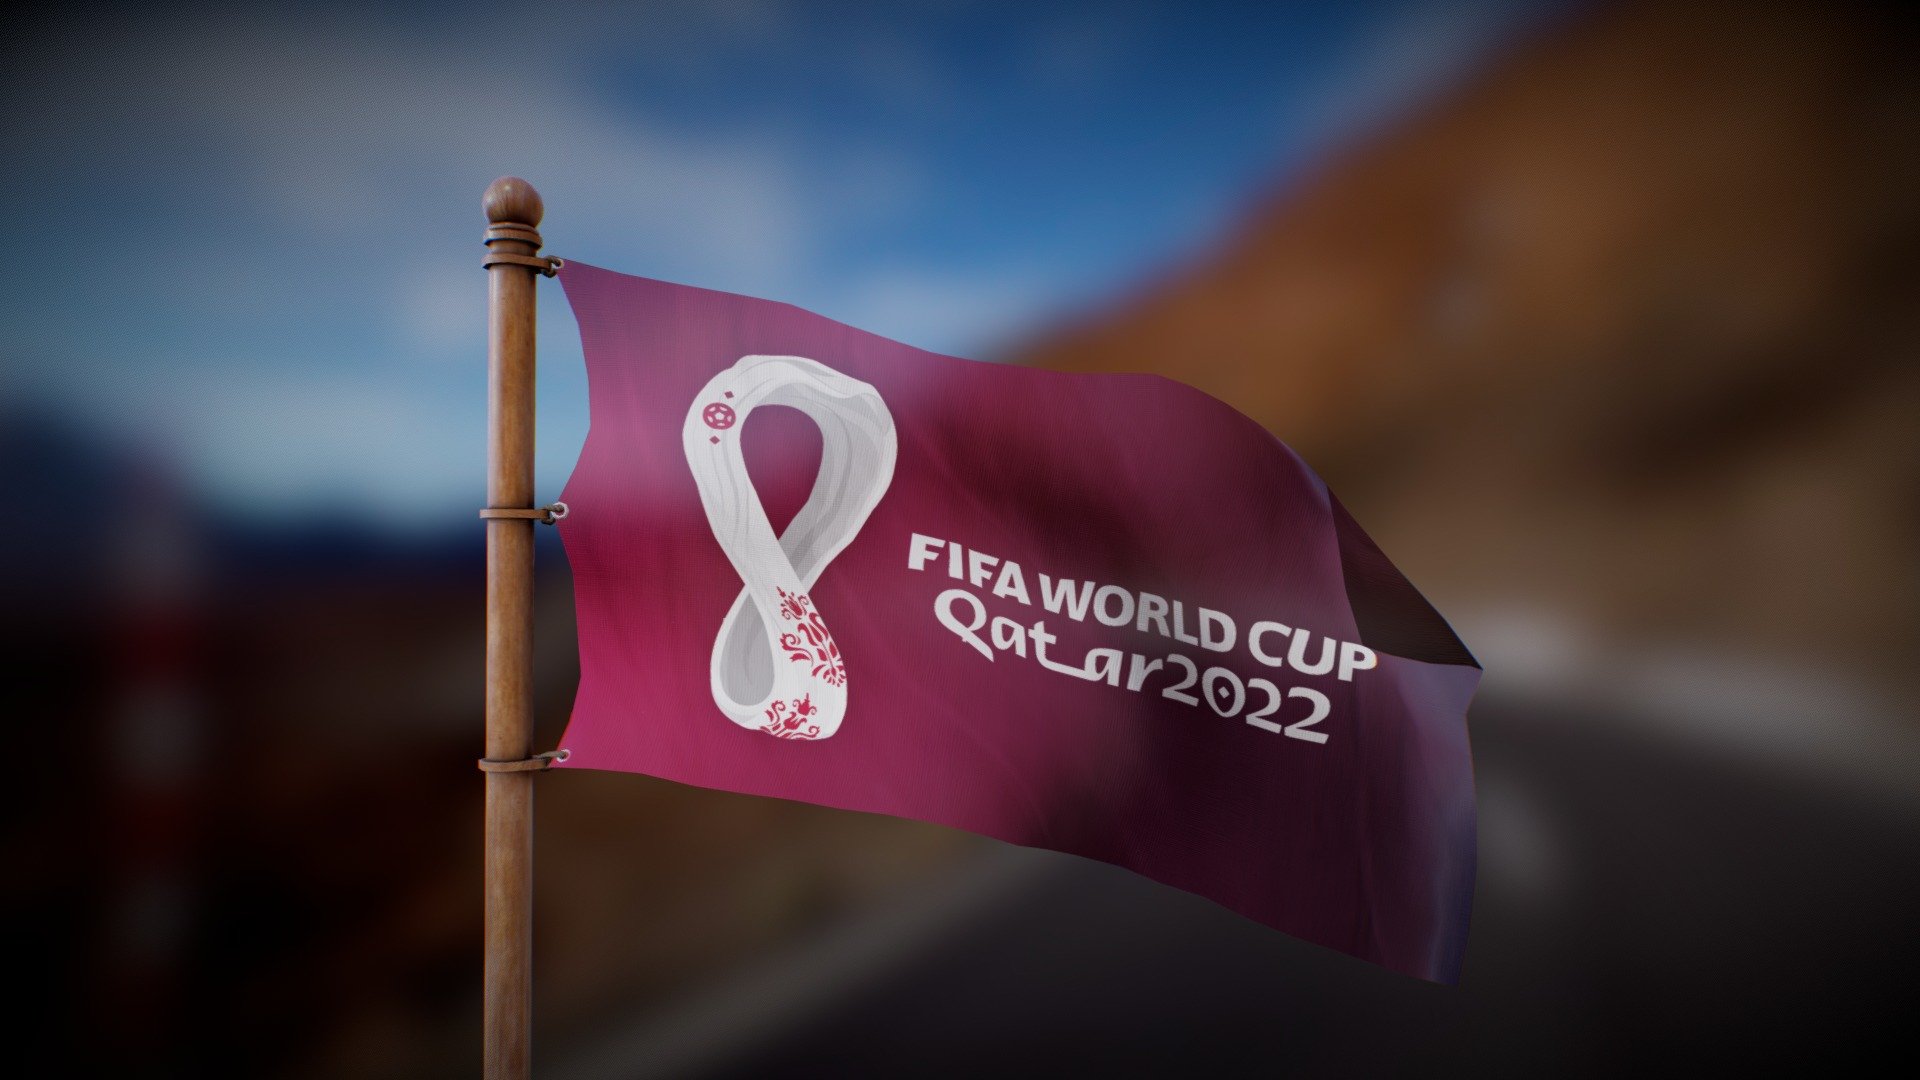 Flag waving in the wind in a looped animation

Joint Animation, perfect for any purpose
4K PBR textures

Feel free to DM me for any question of custom requests - FIFA World Cup Qatar 2022 flag - Wind Animated - Buy Royalty Free 3D model by Deftroy 3d model